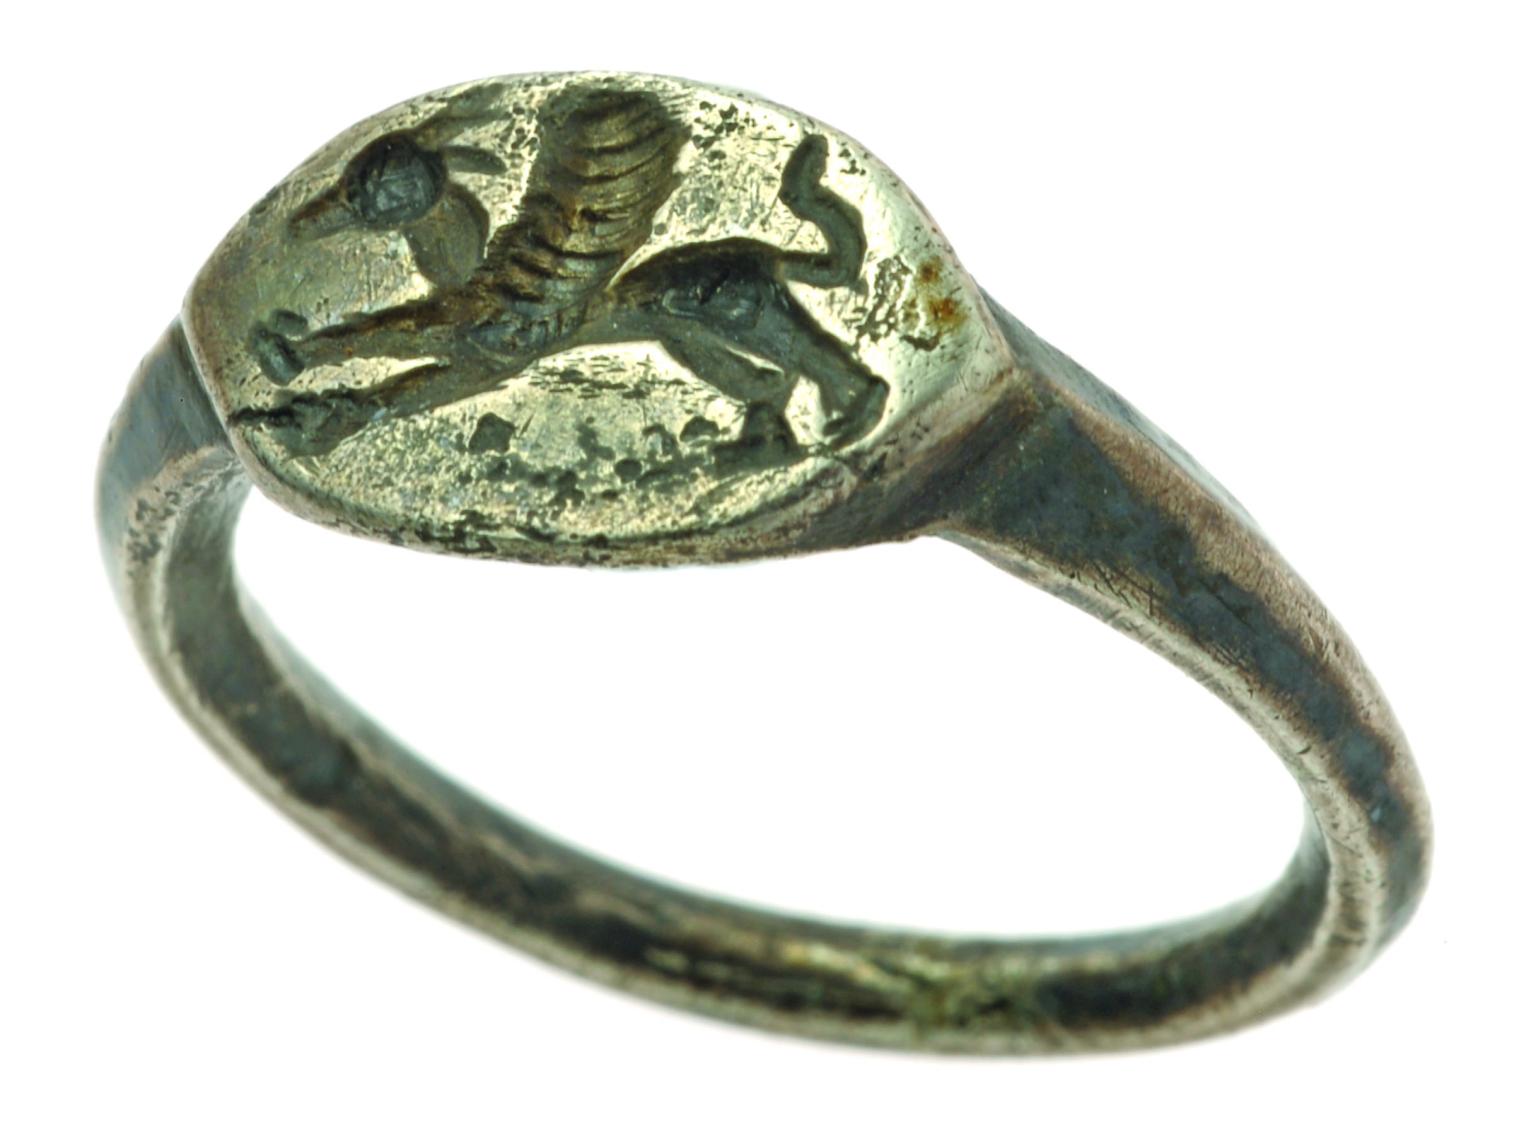 Silver signet ring with image of galloping griffin.